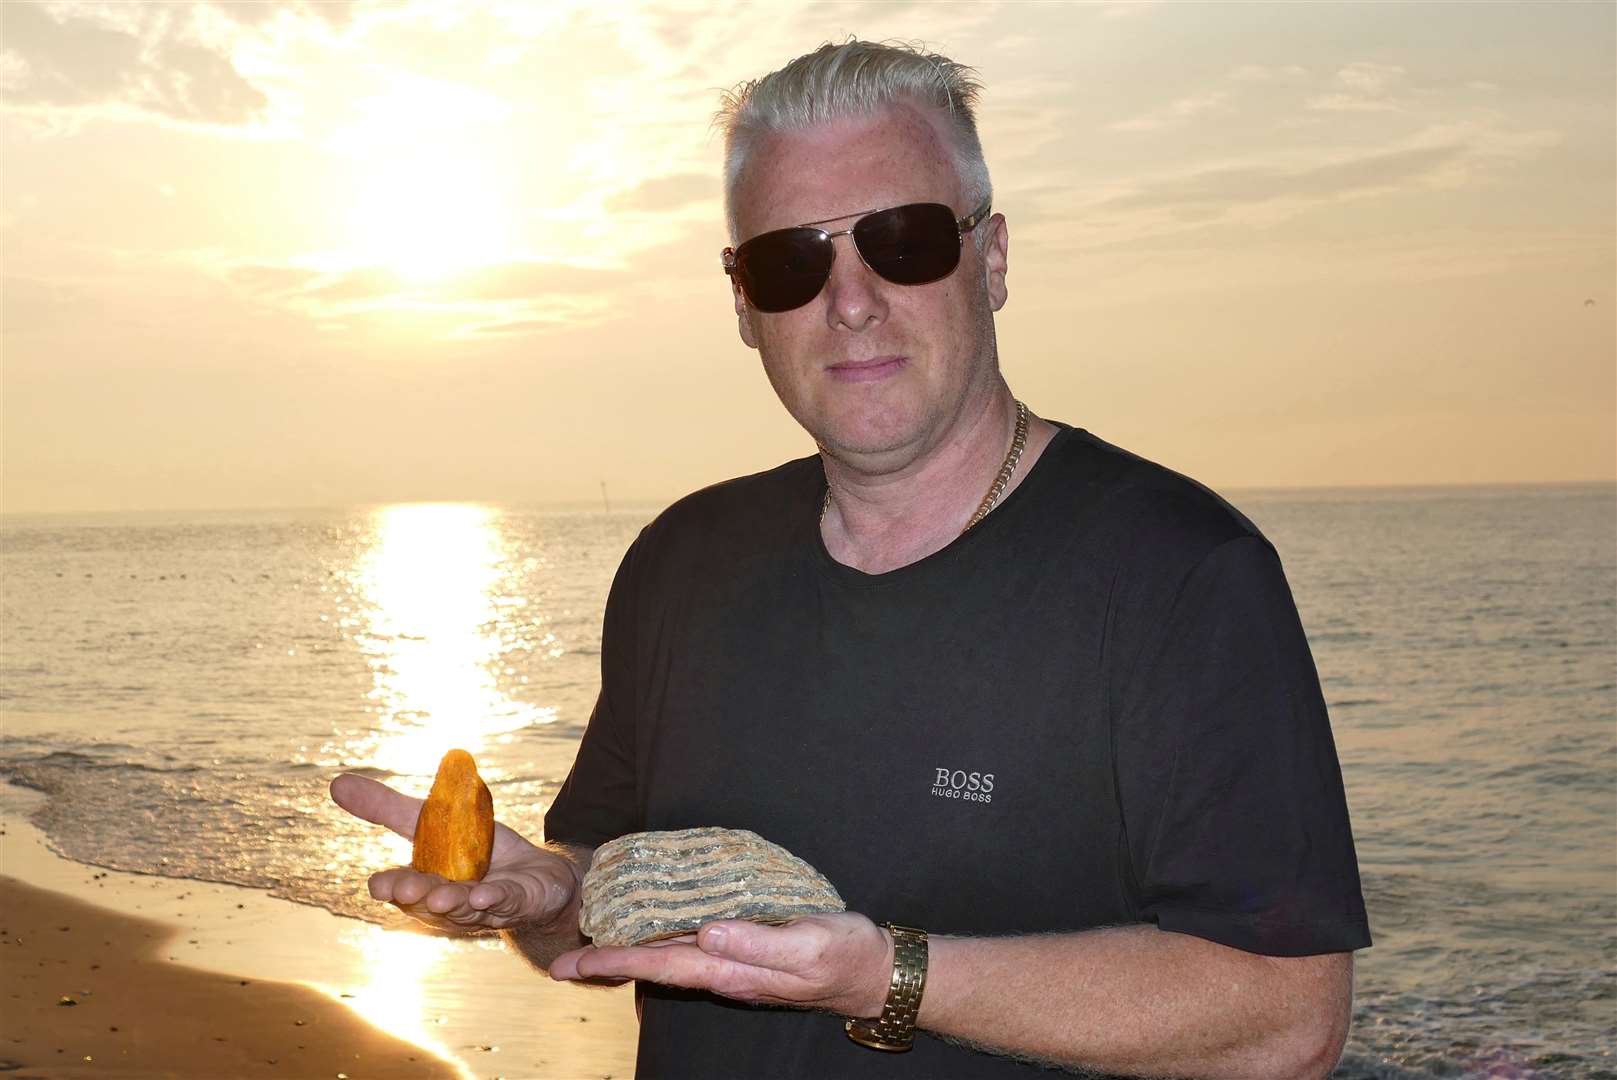 Frank Leppard has been beachcombing on Kent's shores since he was a little boy. Here he is with two of his prize finds - a mammoth tooth, and a huge piece of amber. Picture: Frank Leppard